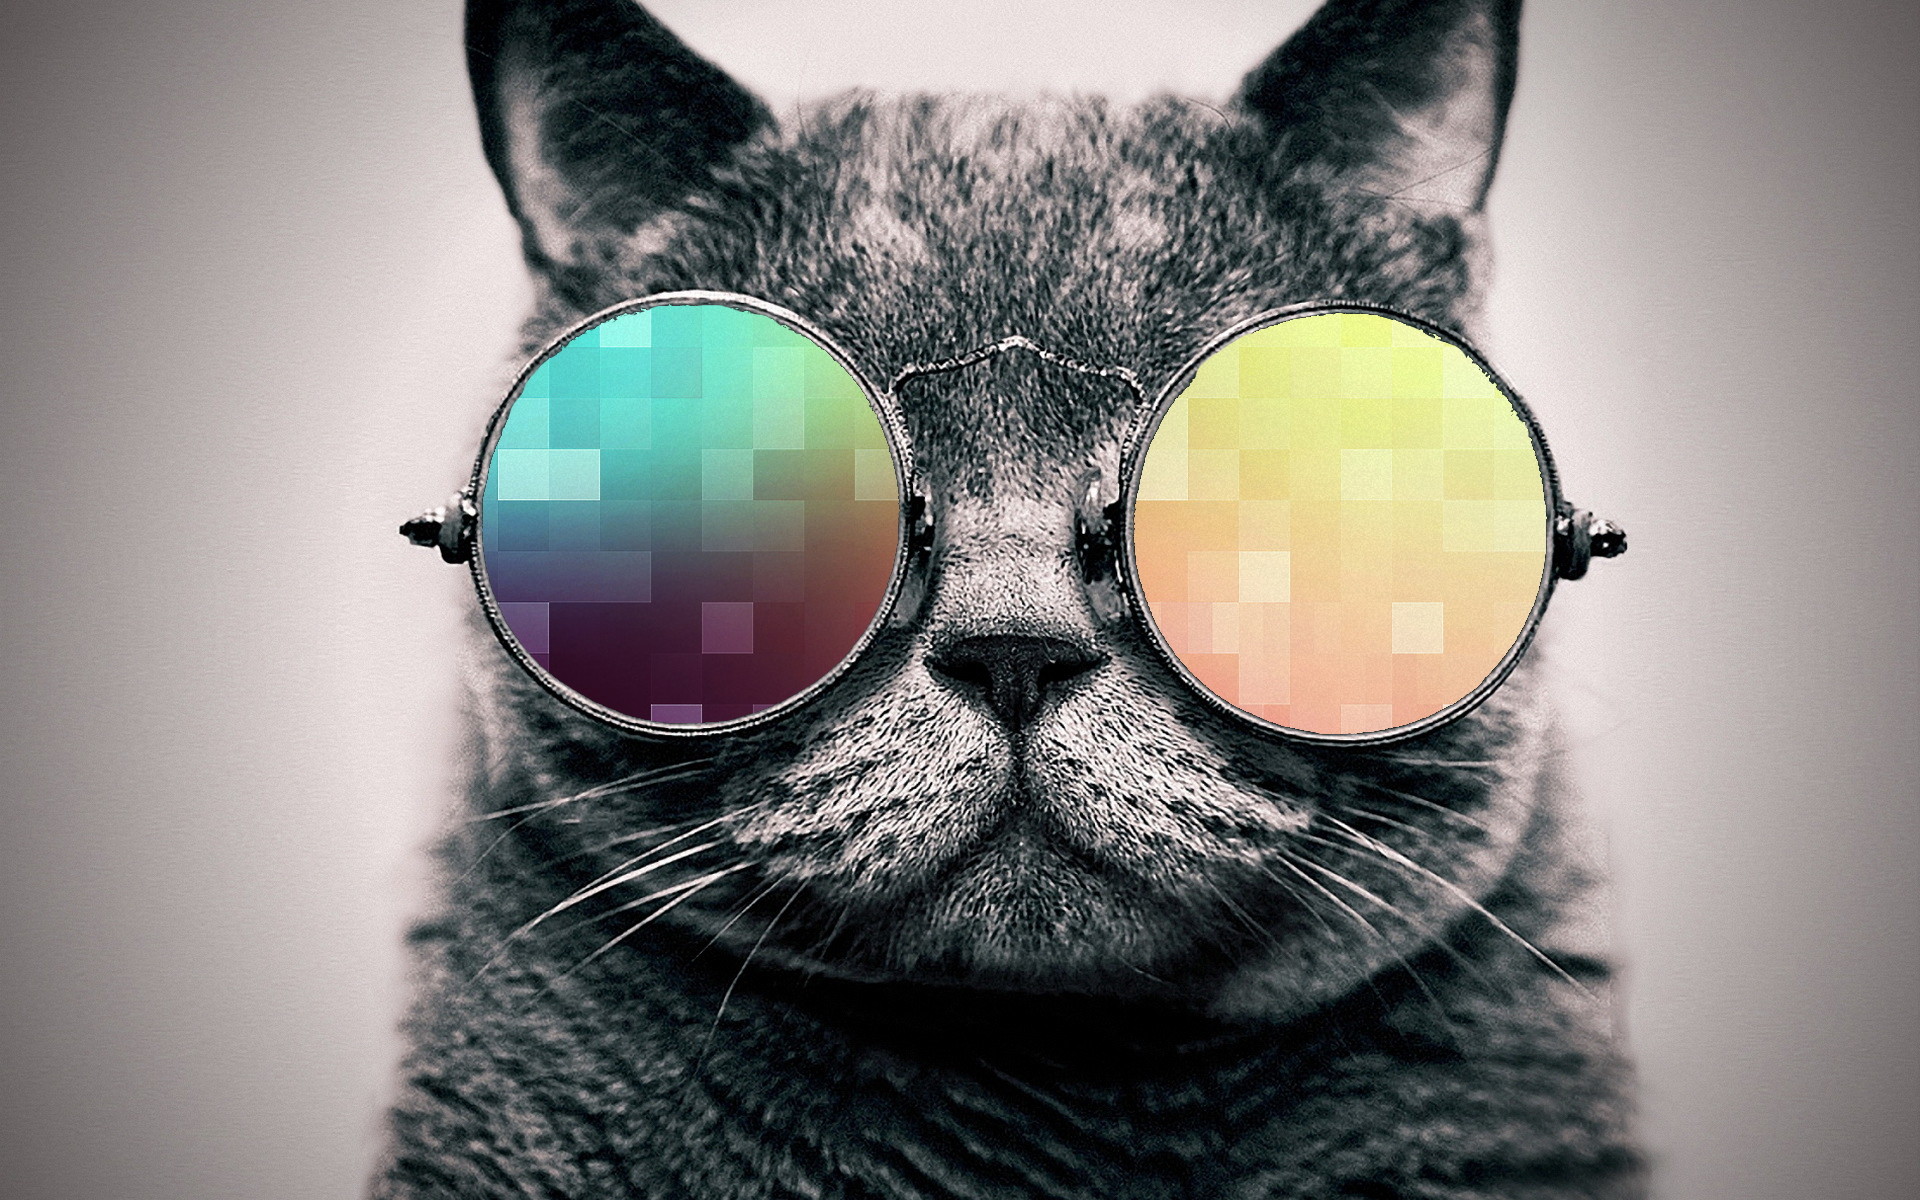 Cool cat wallpaper. By ToValhalla Download 1920 X 1200